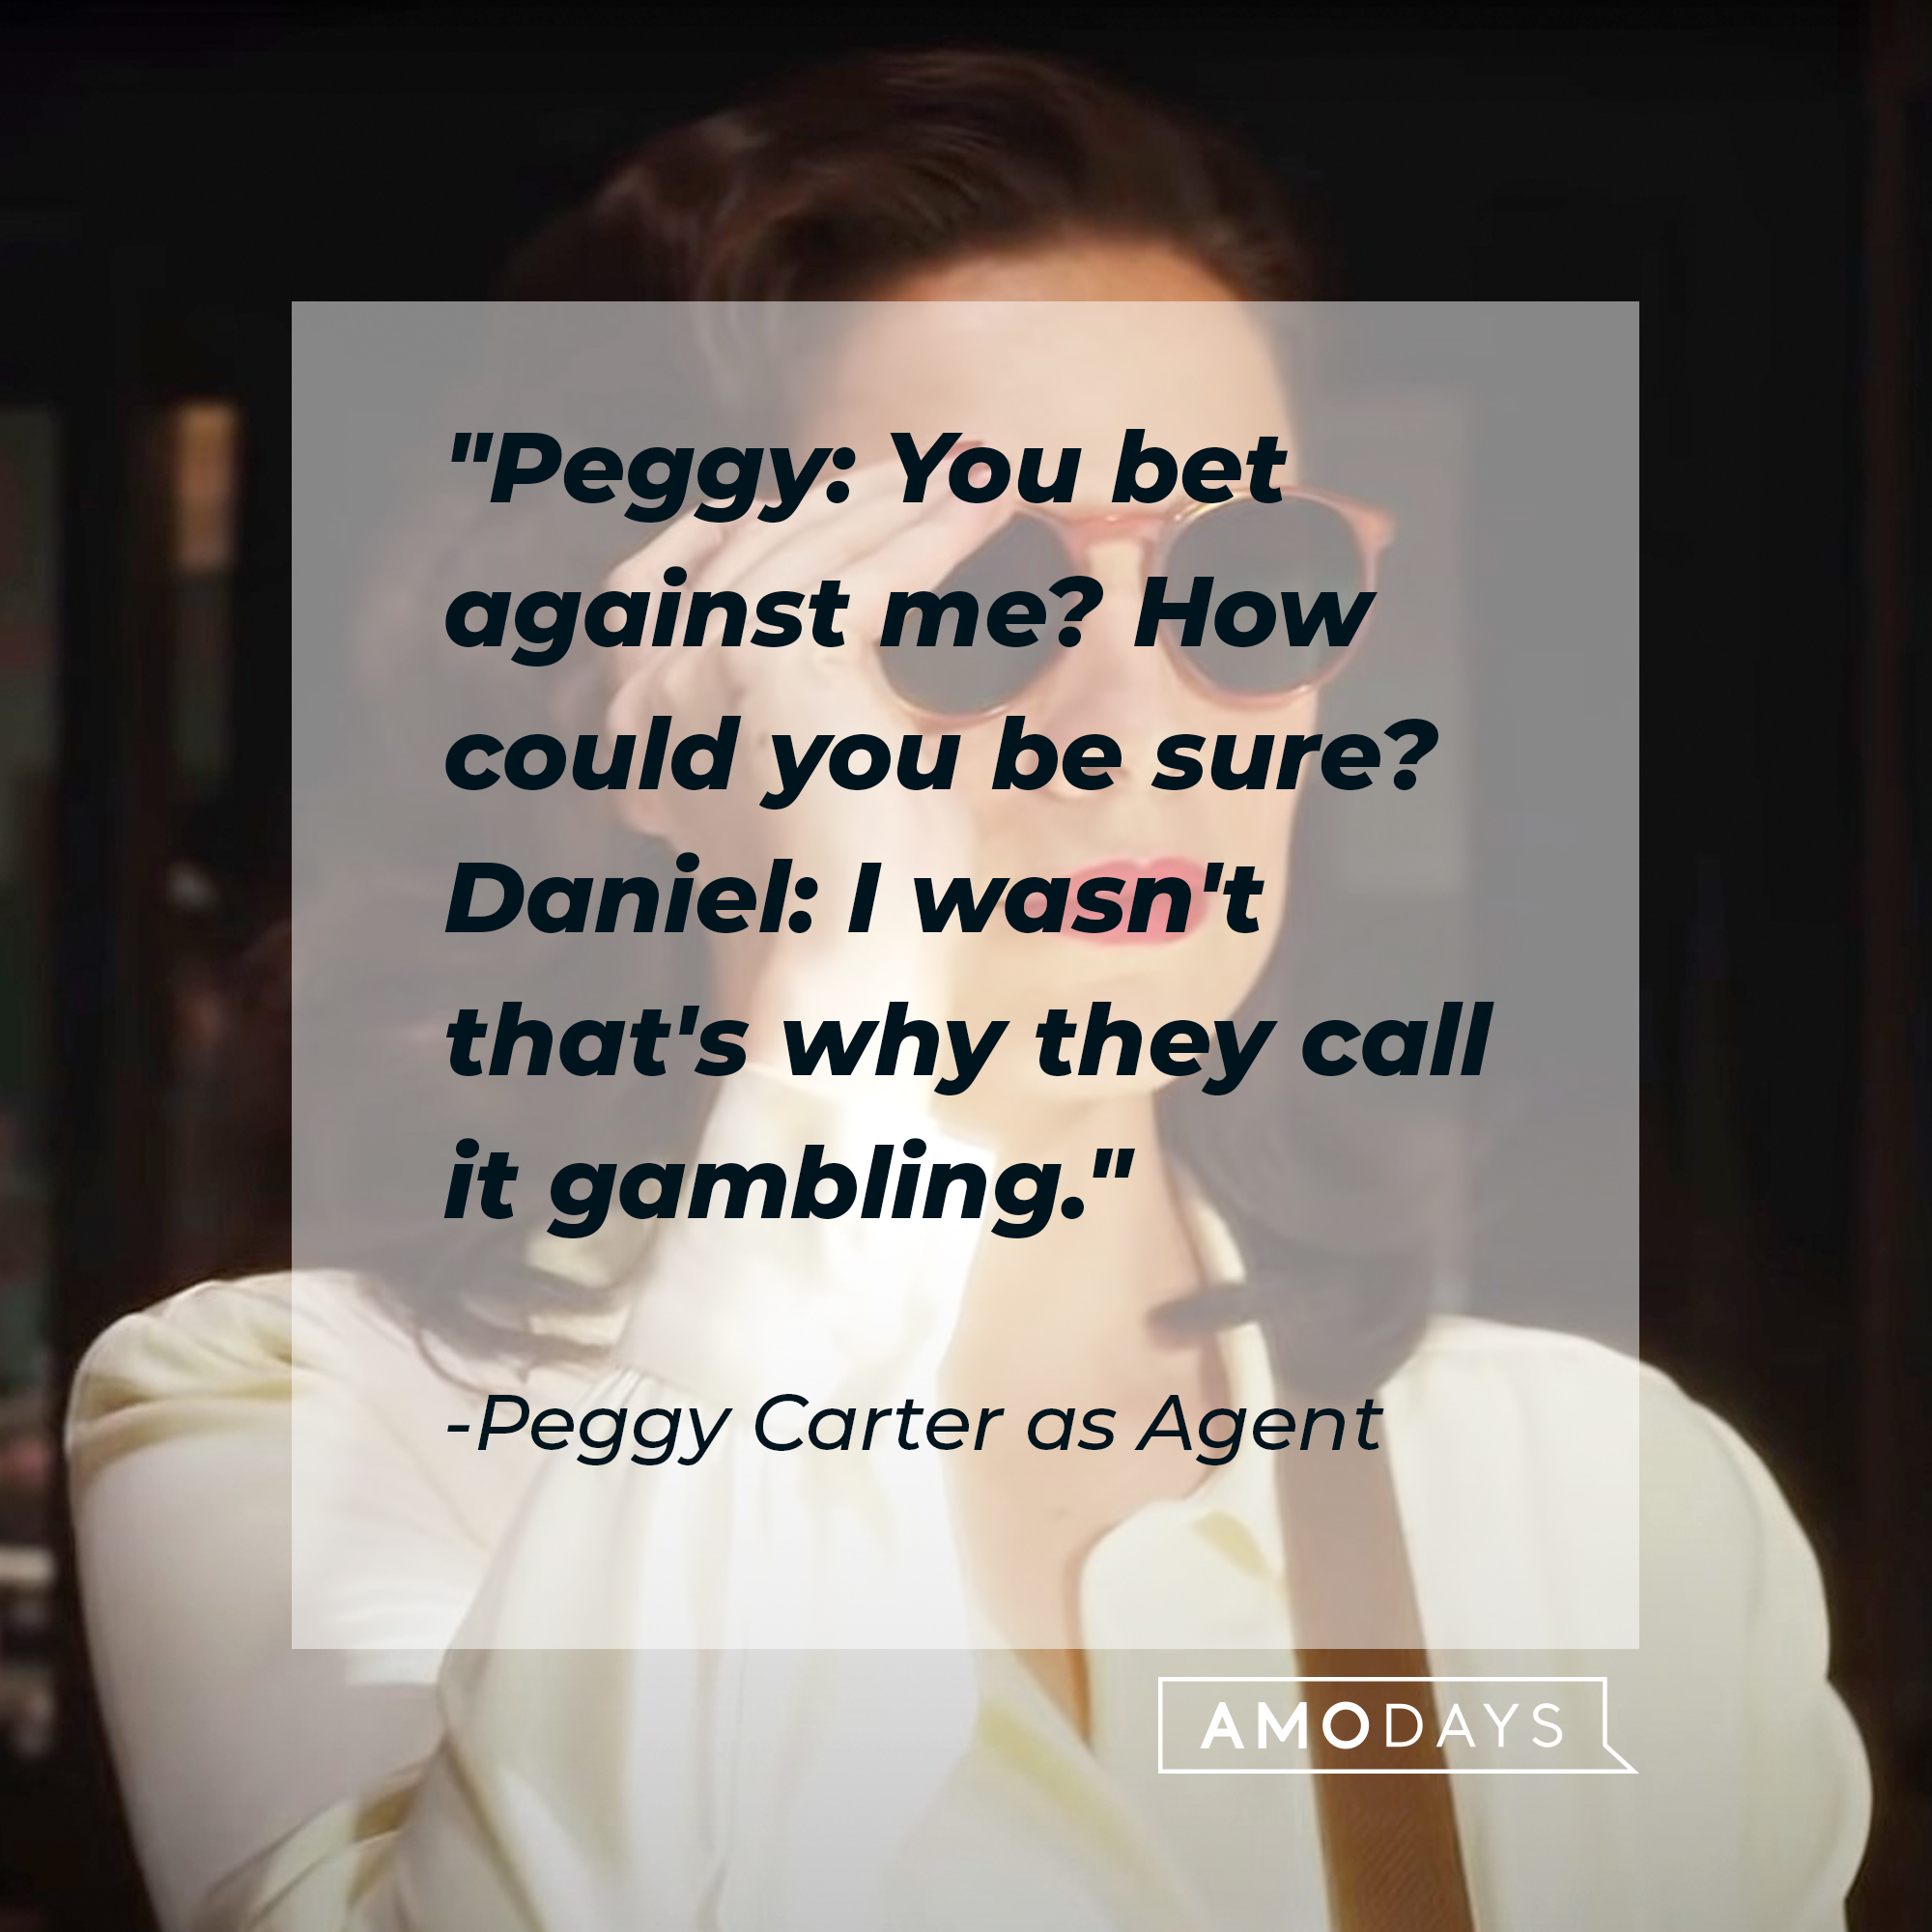 Peggy Carter as Agent's quote: "Peggy: You bet against me? How could you be sure? / Daniel: I wasn't that's why they call it gambling." | Source: Facebook.com/marvelstudios